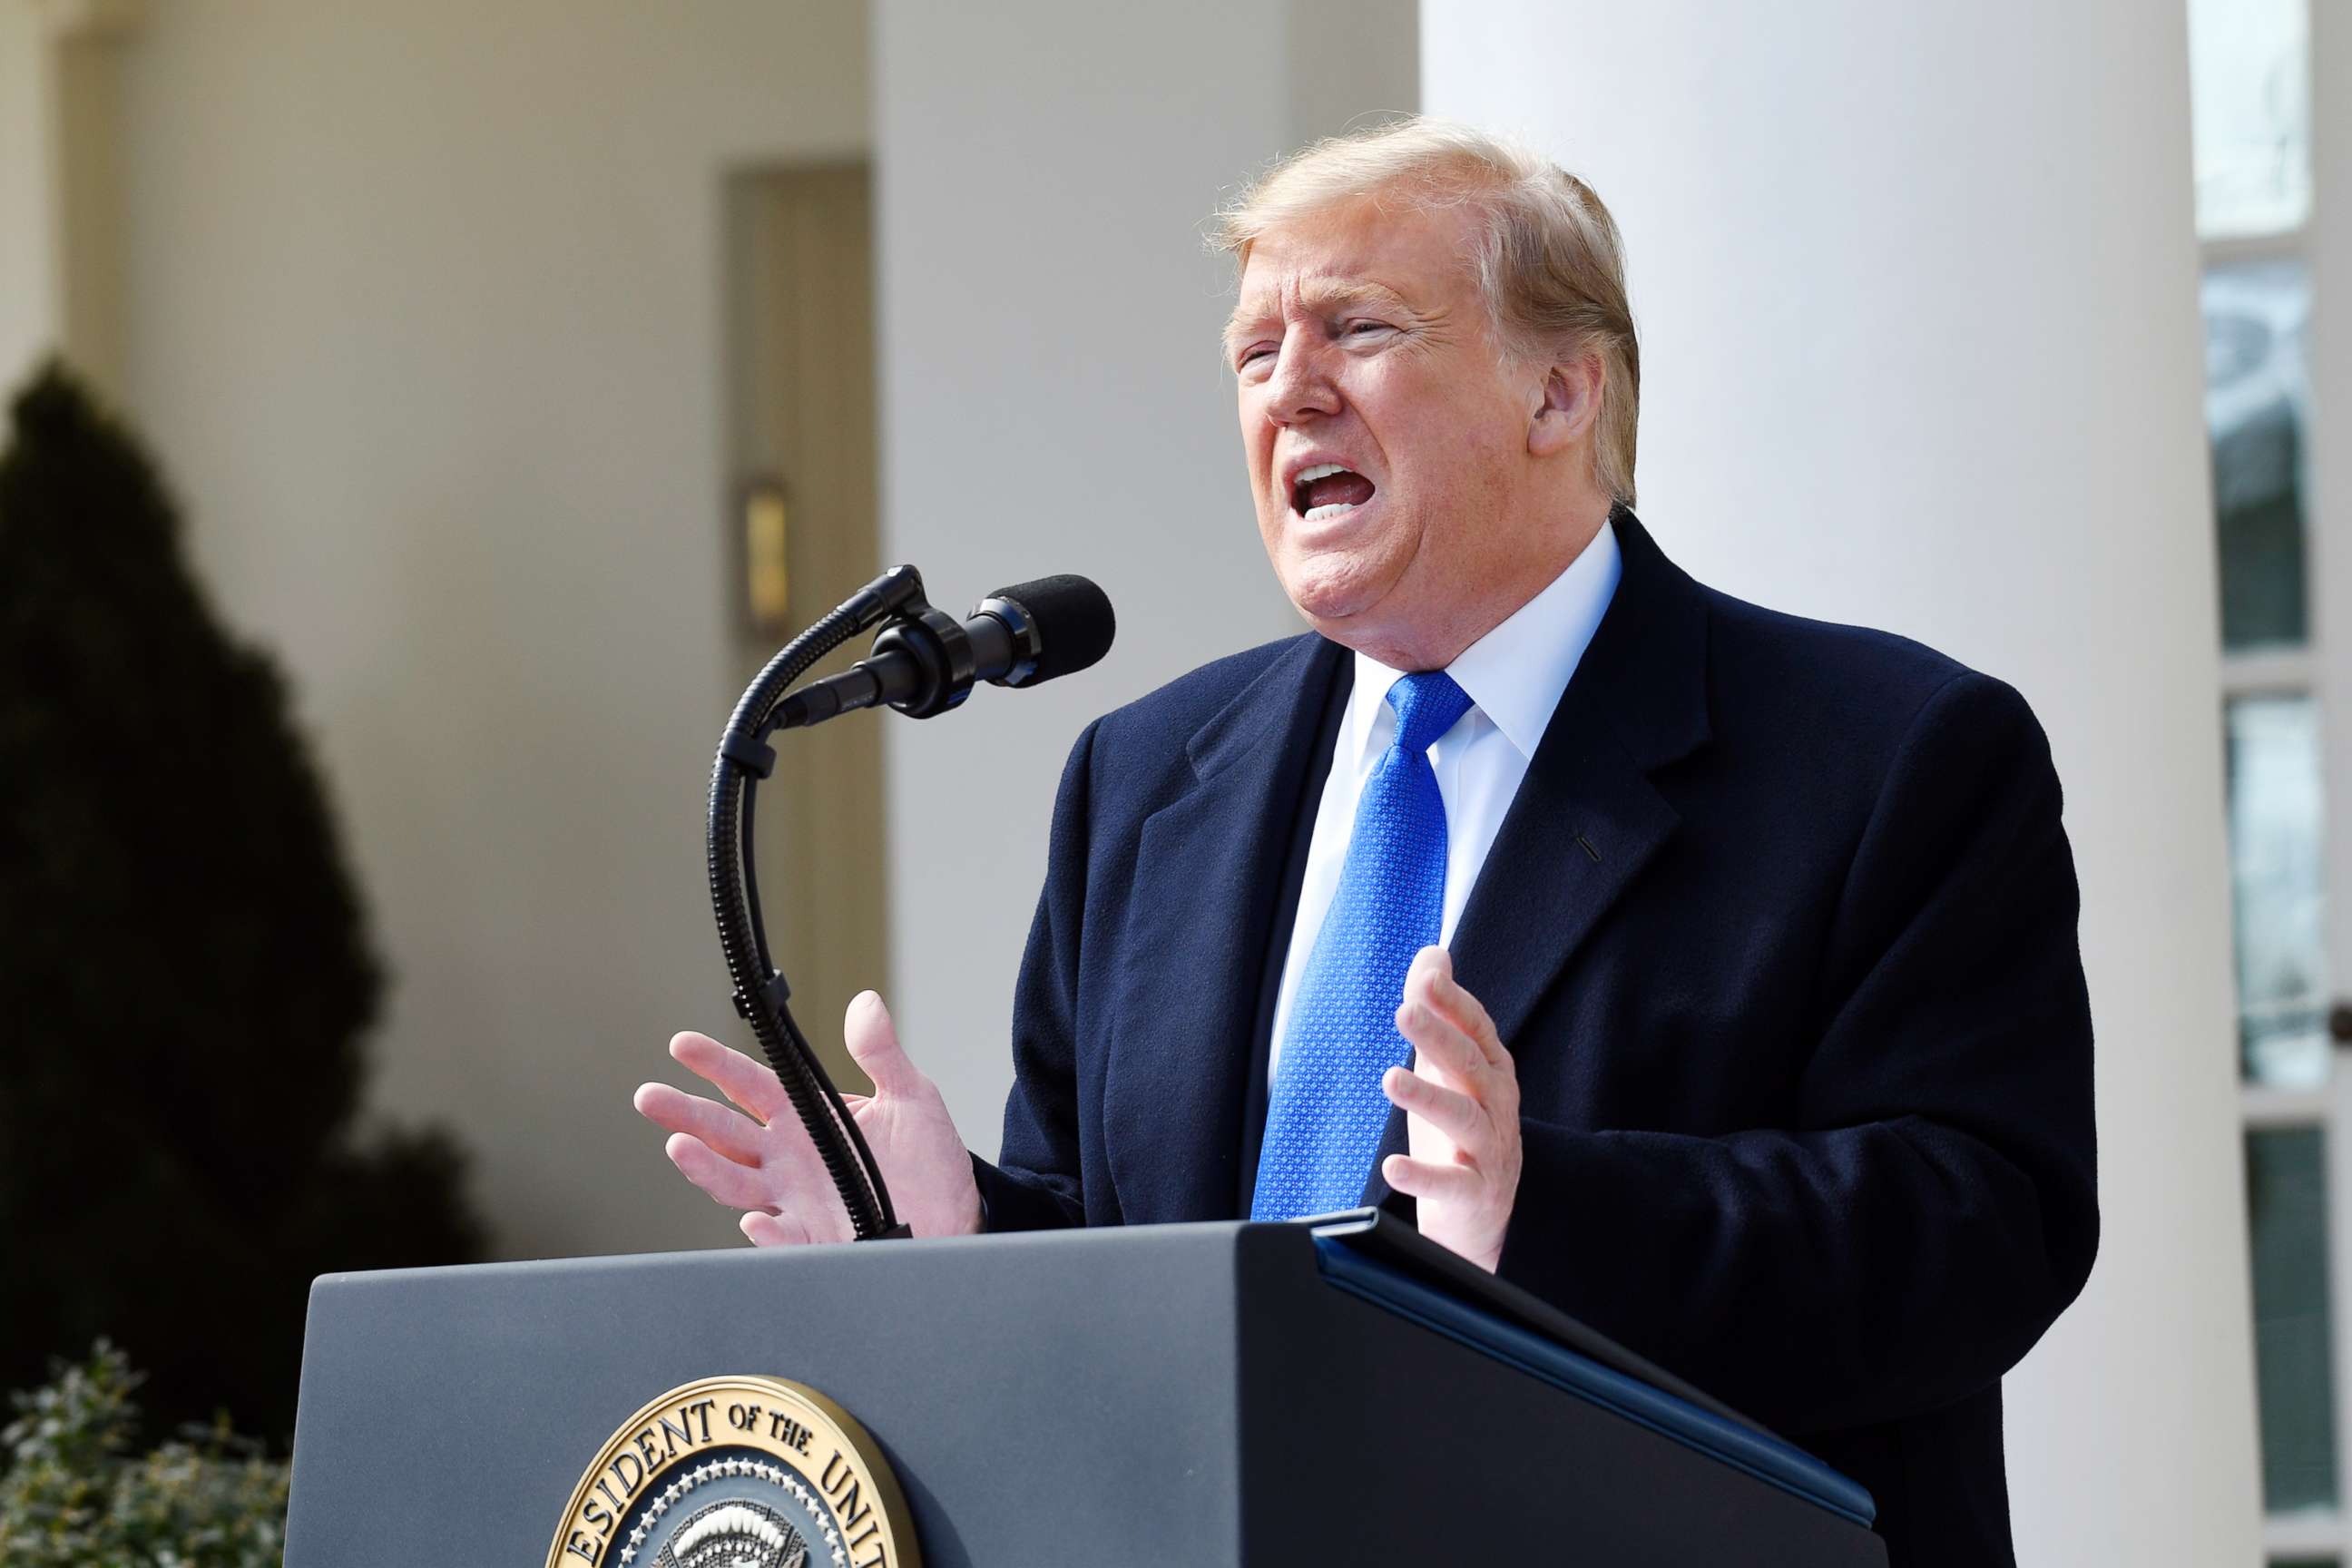 PHOTO: President Donald Trump speaks during an event in the Rose Garden at the White House in Washington, D.C., to declare a national emergency in order to build a wall along the southern border, Feb. 15, 2019.